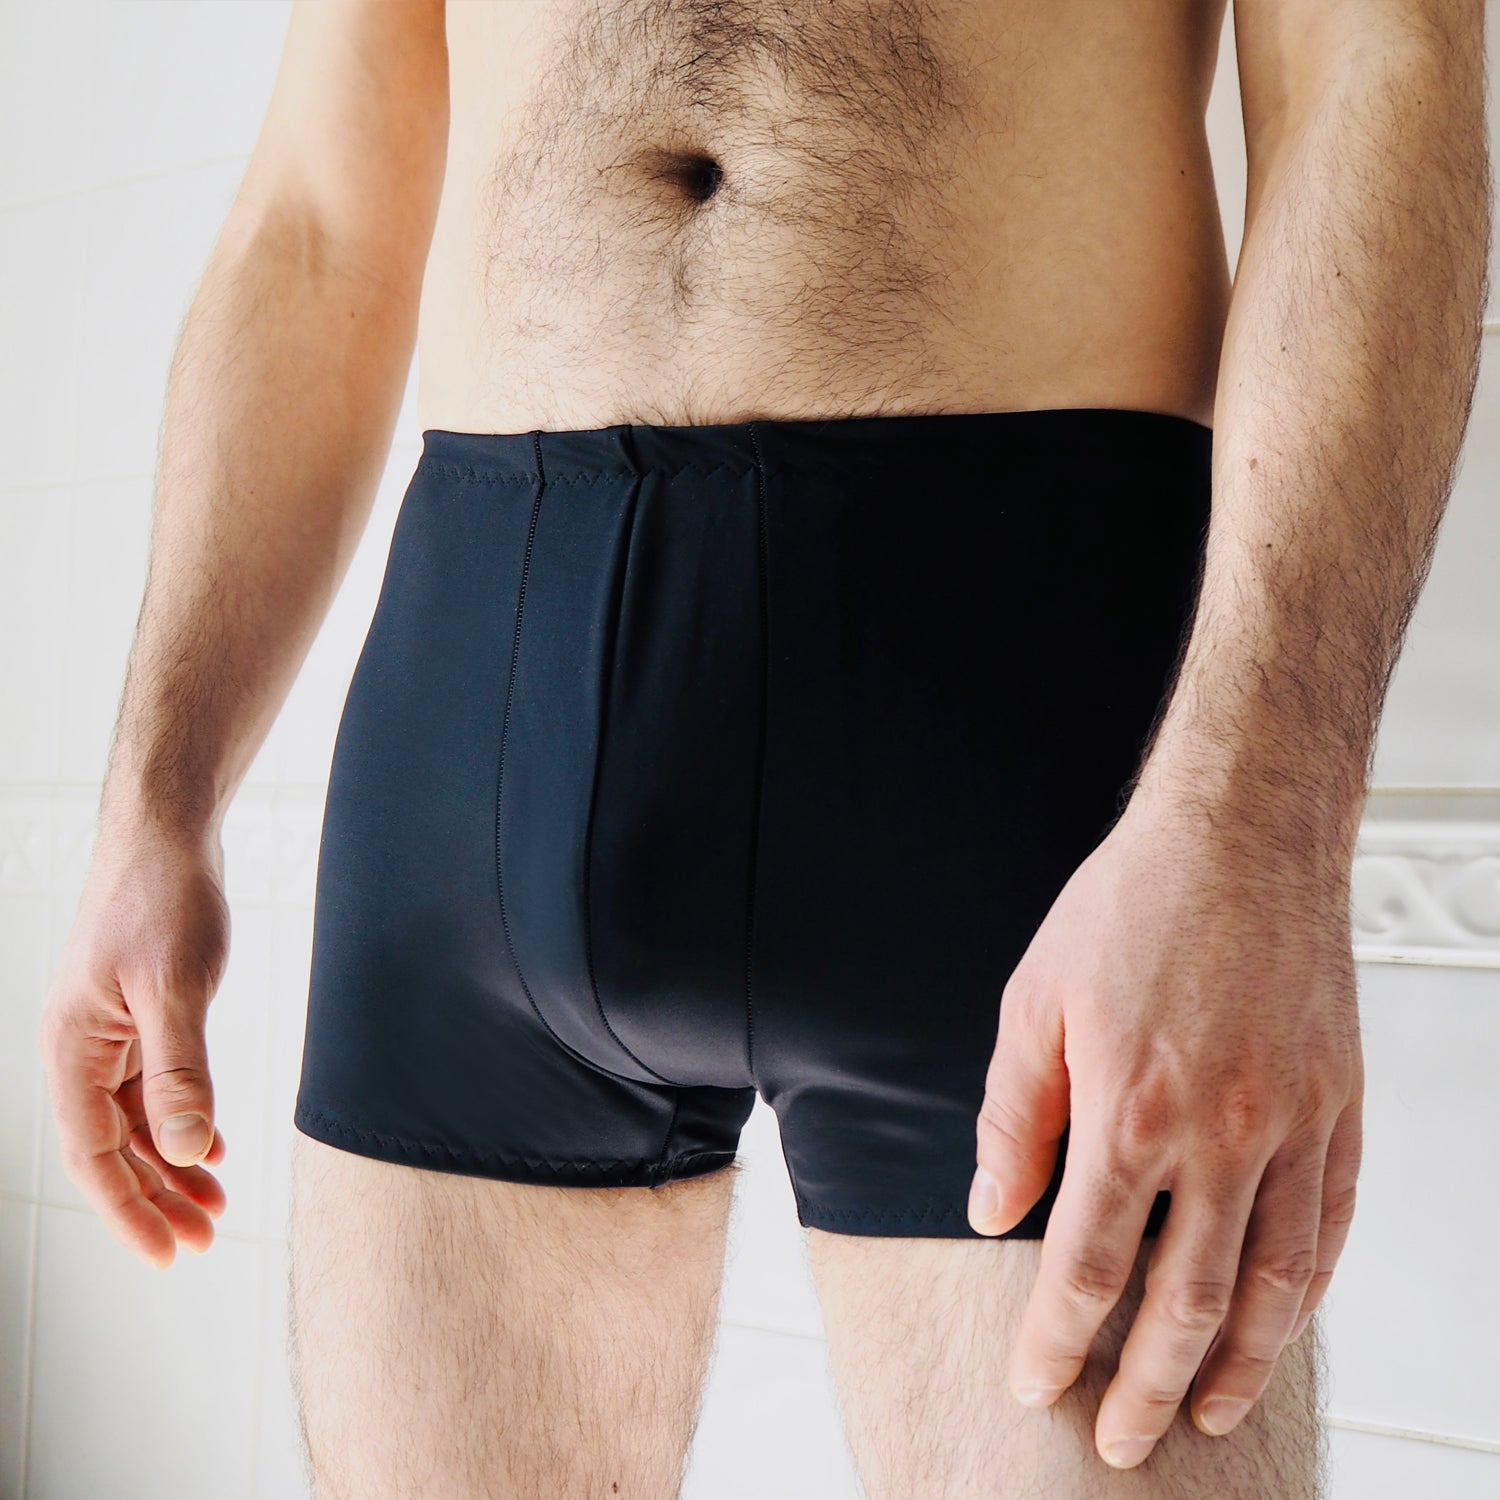 Lower body of a man with a hairy body wearing black tight trunks